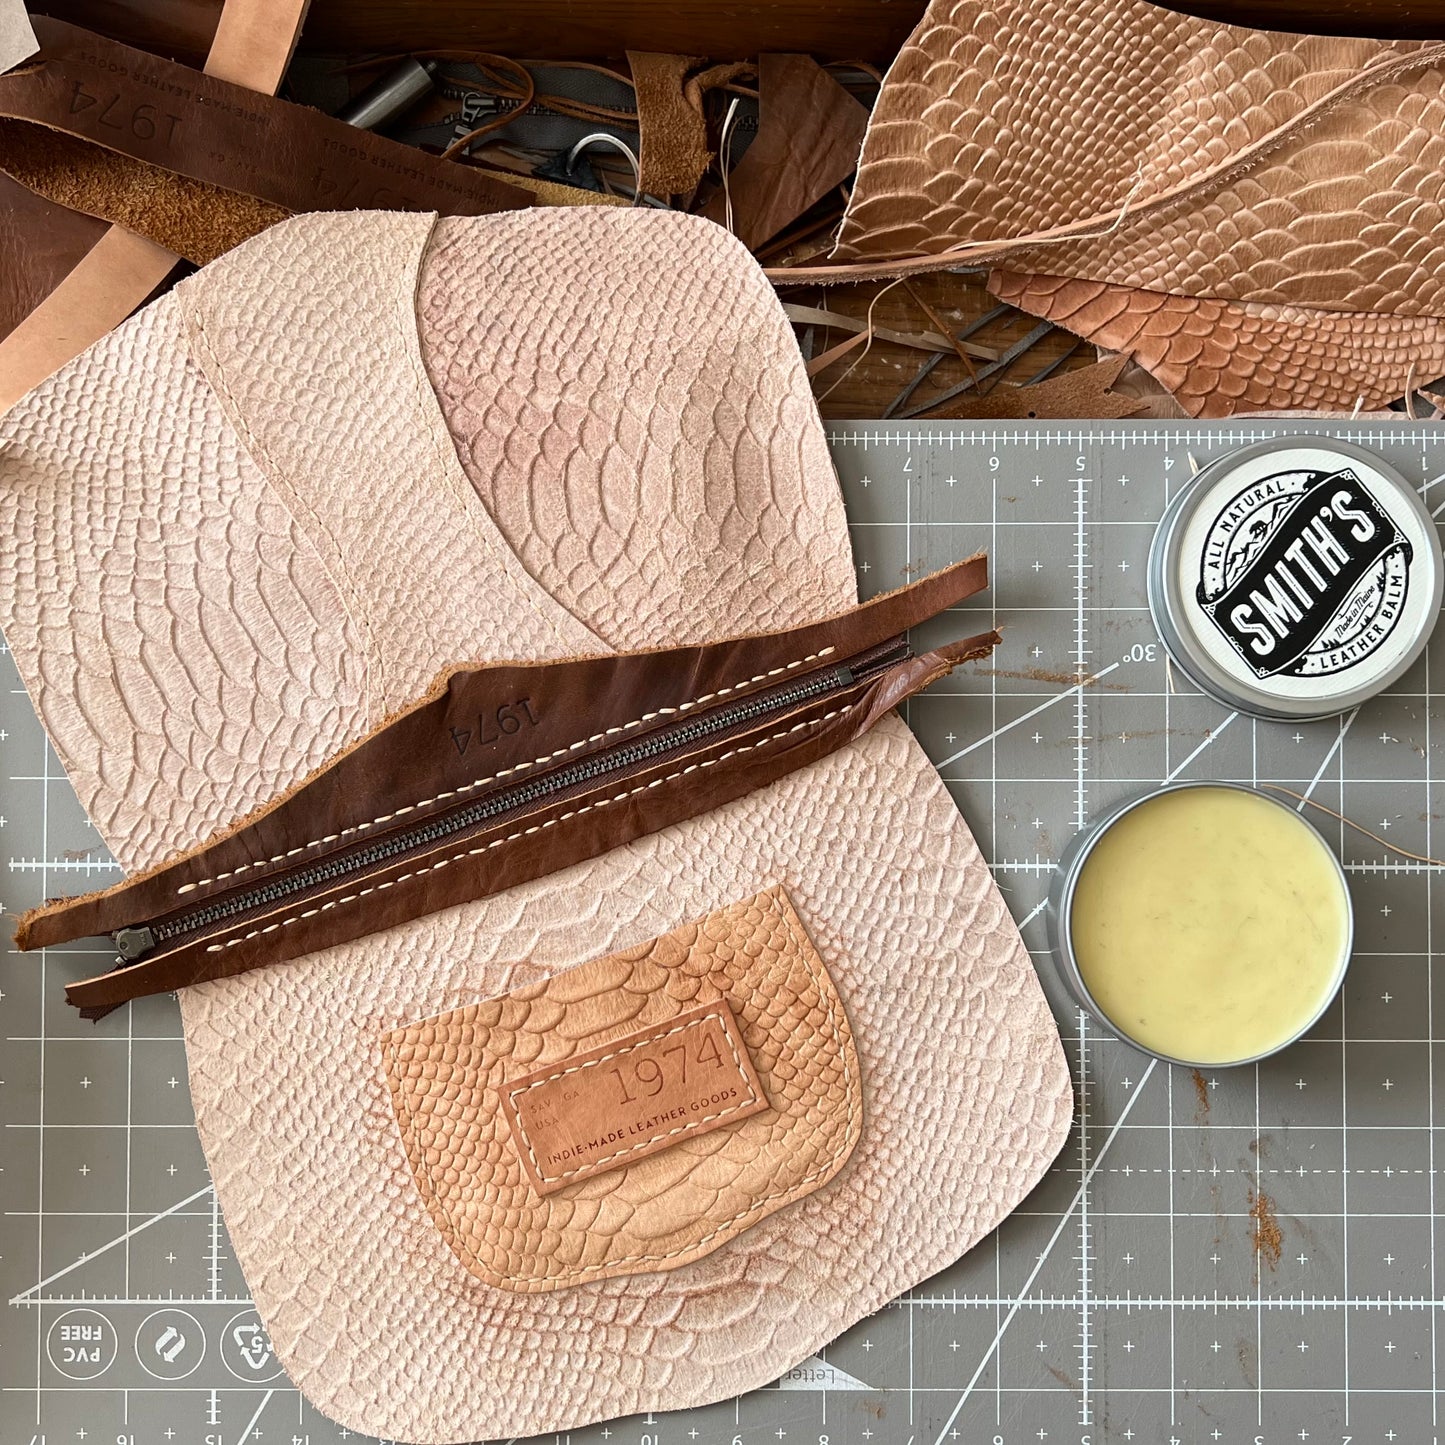 1974 Broad River Leather Wristlet Being Made